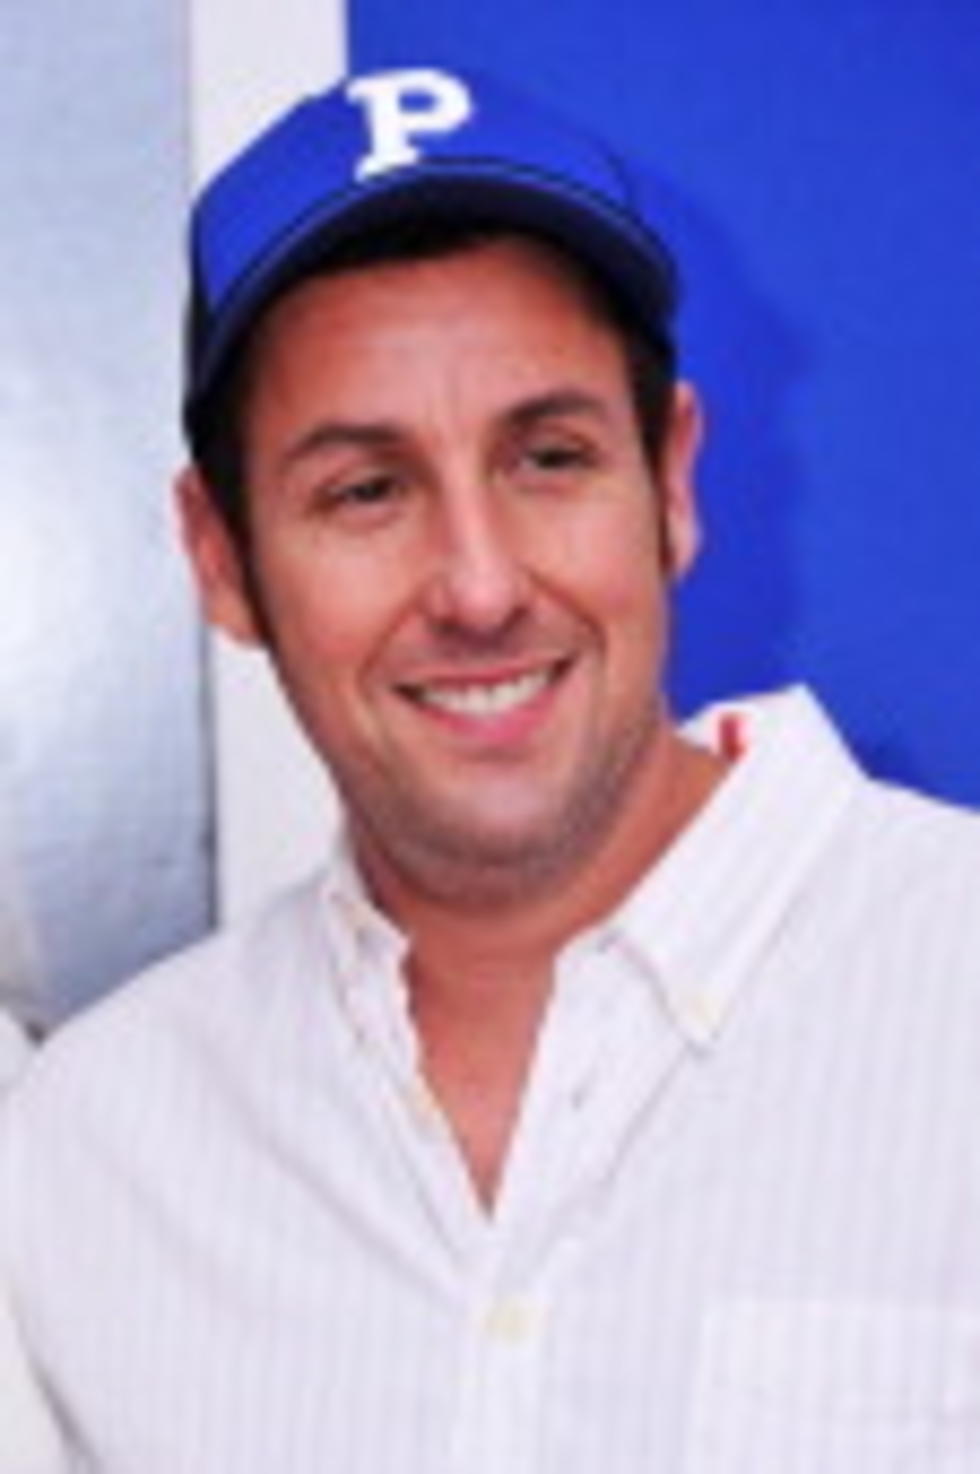 Adam Sandler Most Overpaid Actor in Hollywood